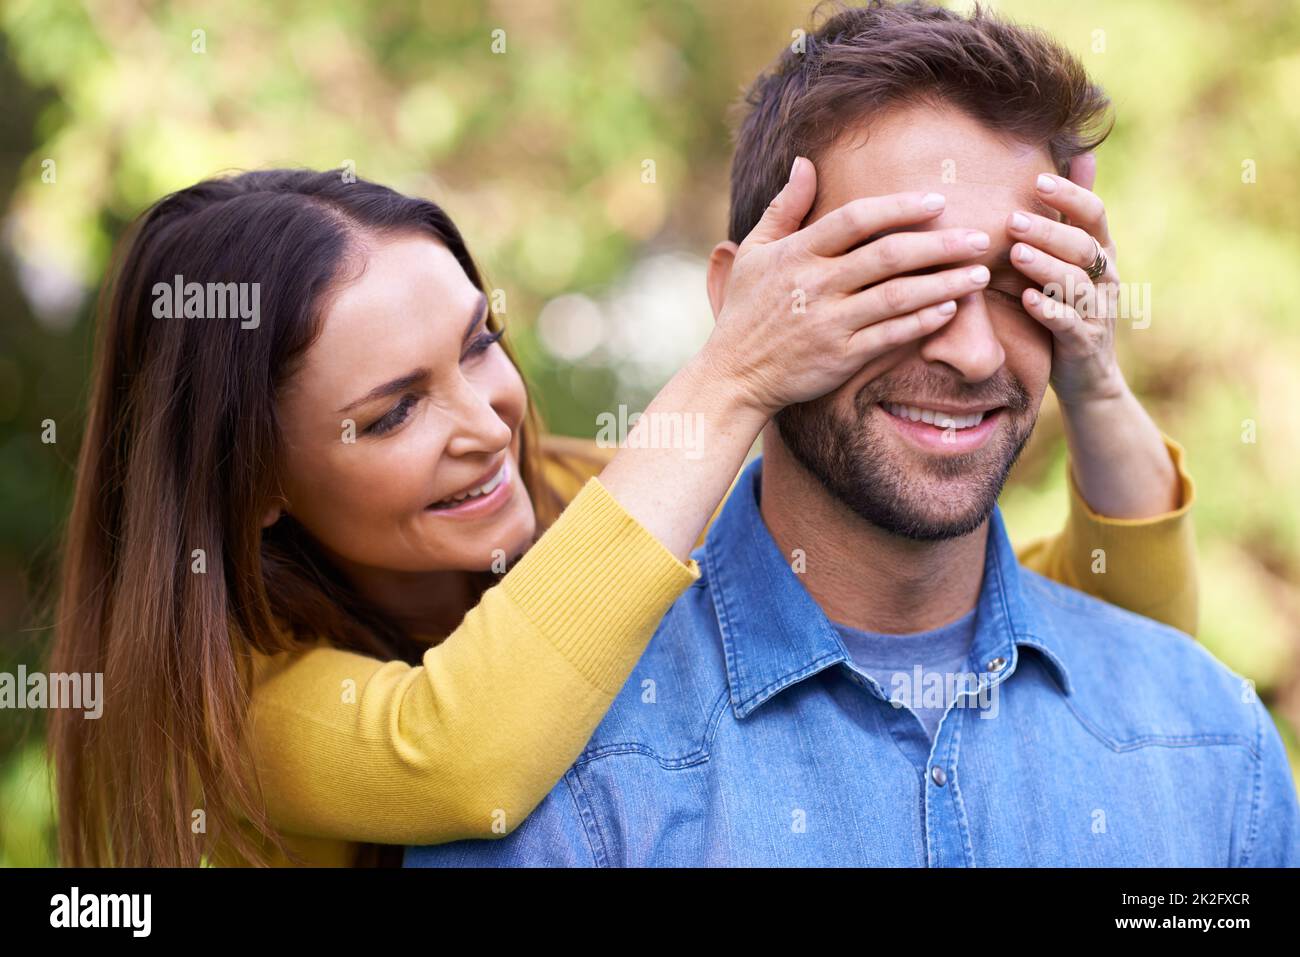 The joys of surprises. Shot of a happy young couple being playful outside. Stock Photo